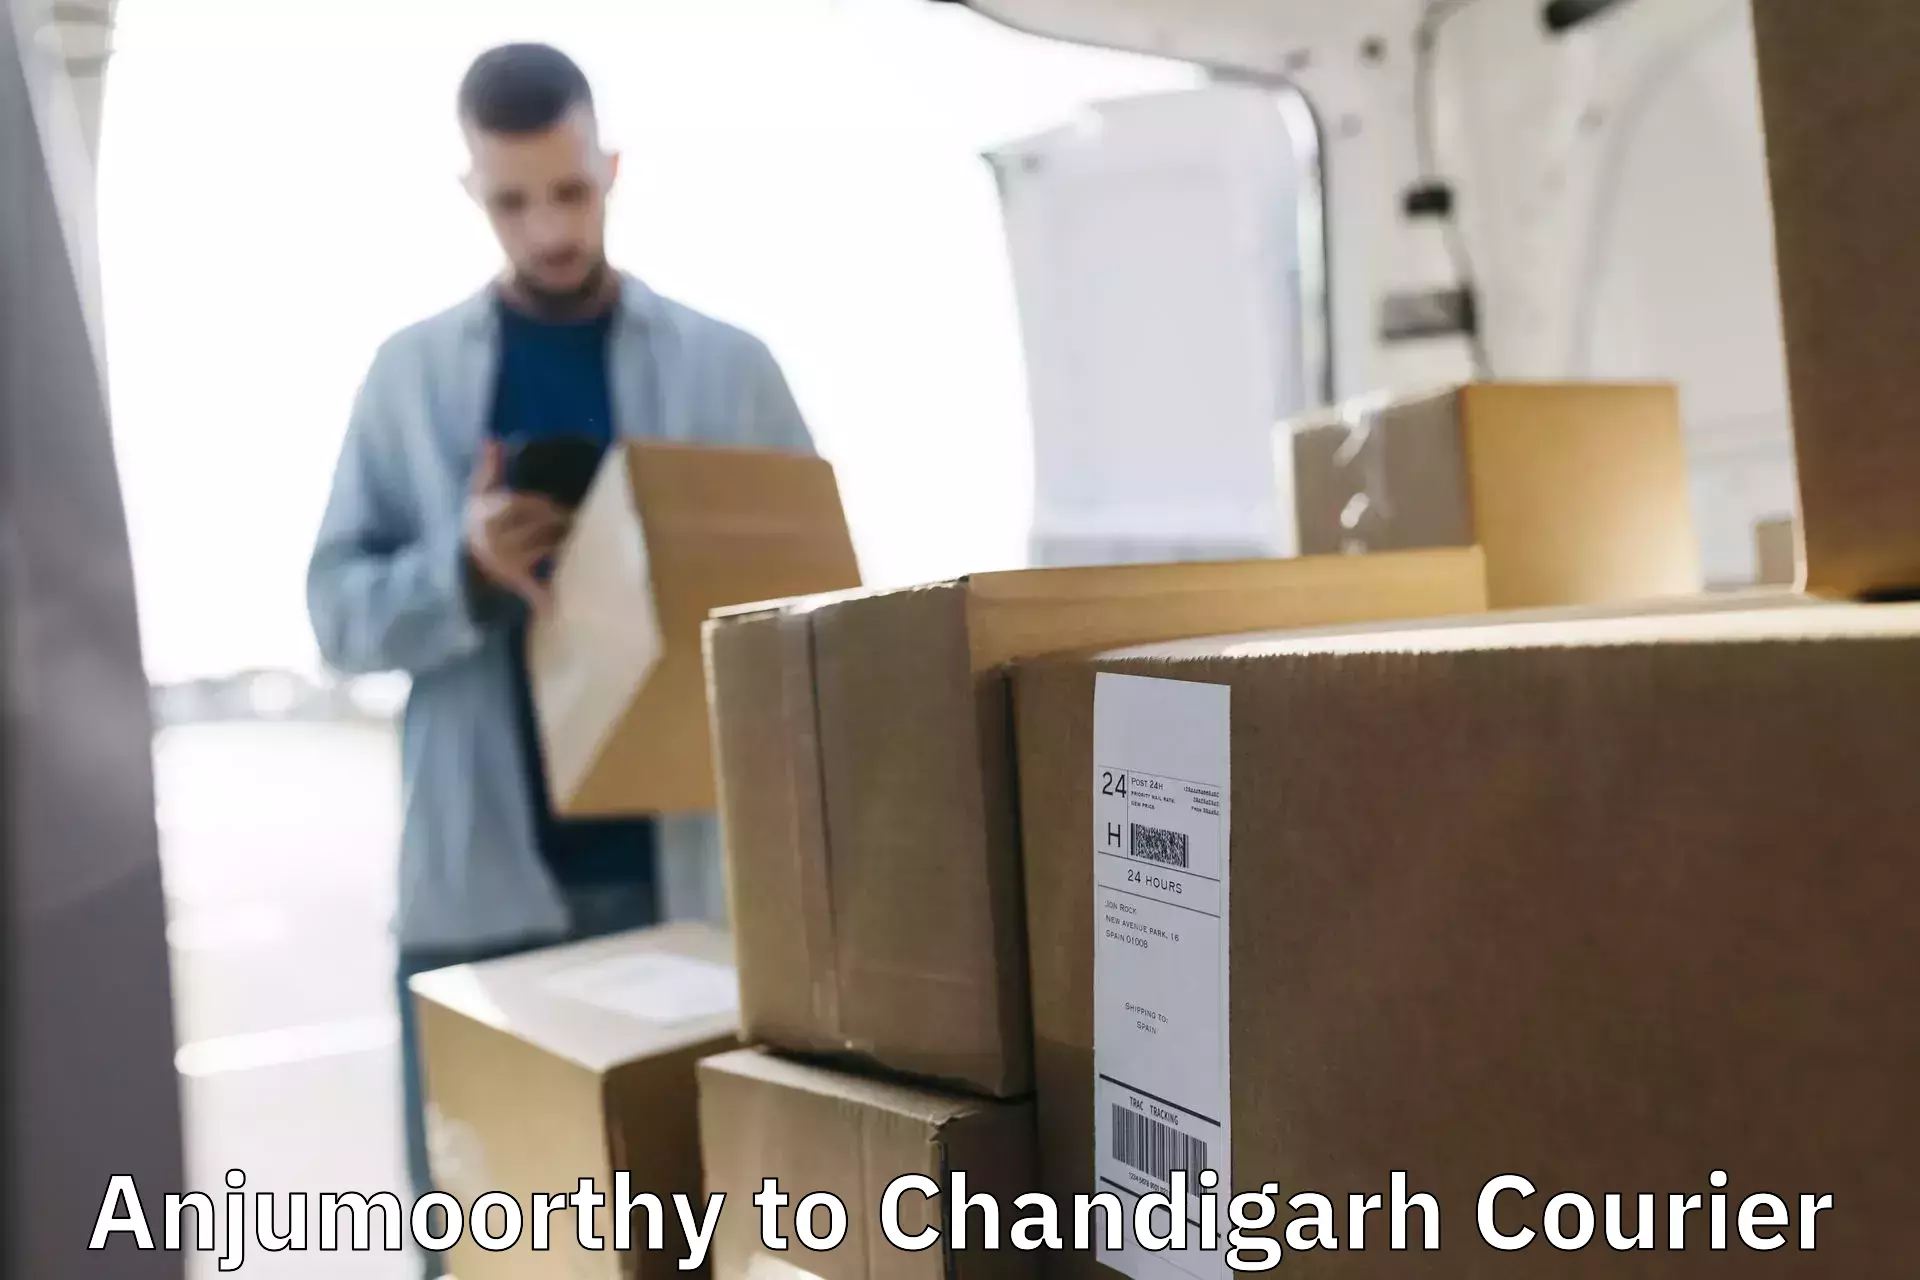 Business shipping needs in Anjumoorthy to Chandigarh